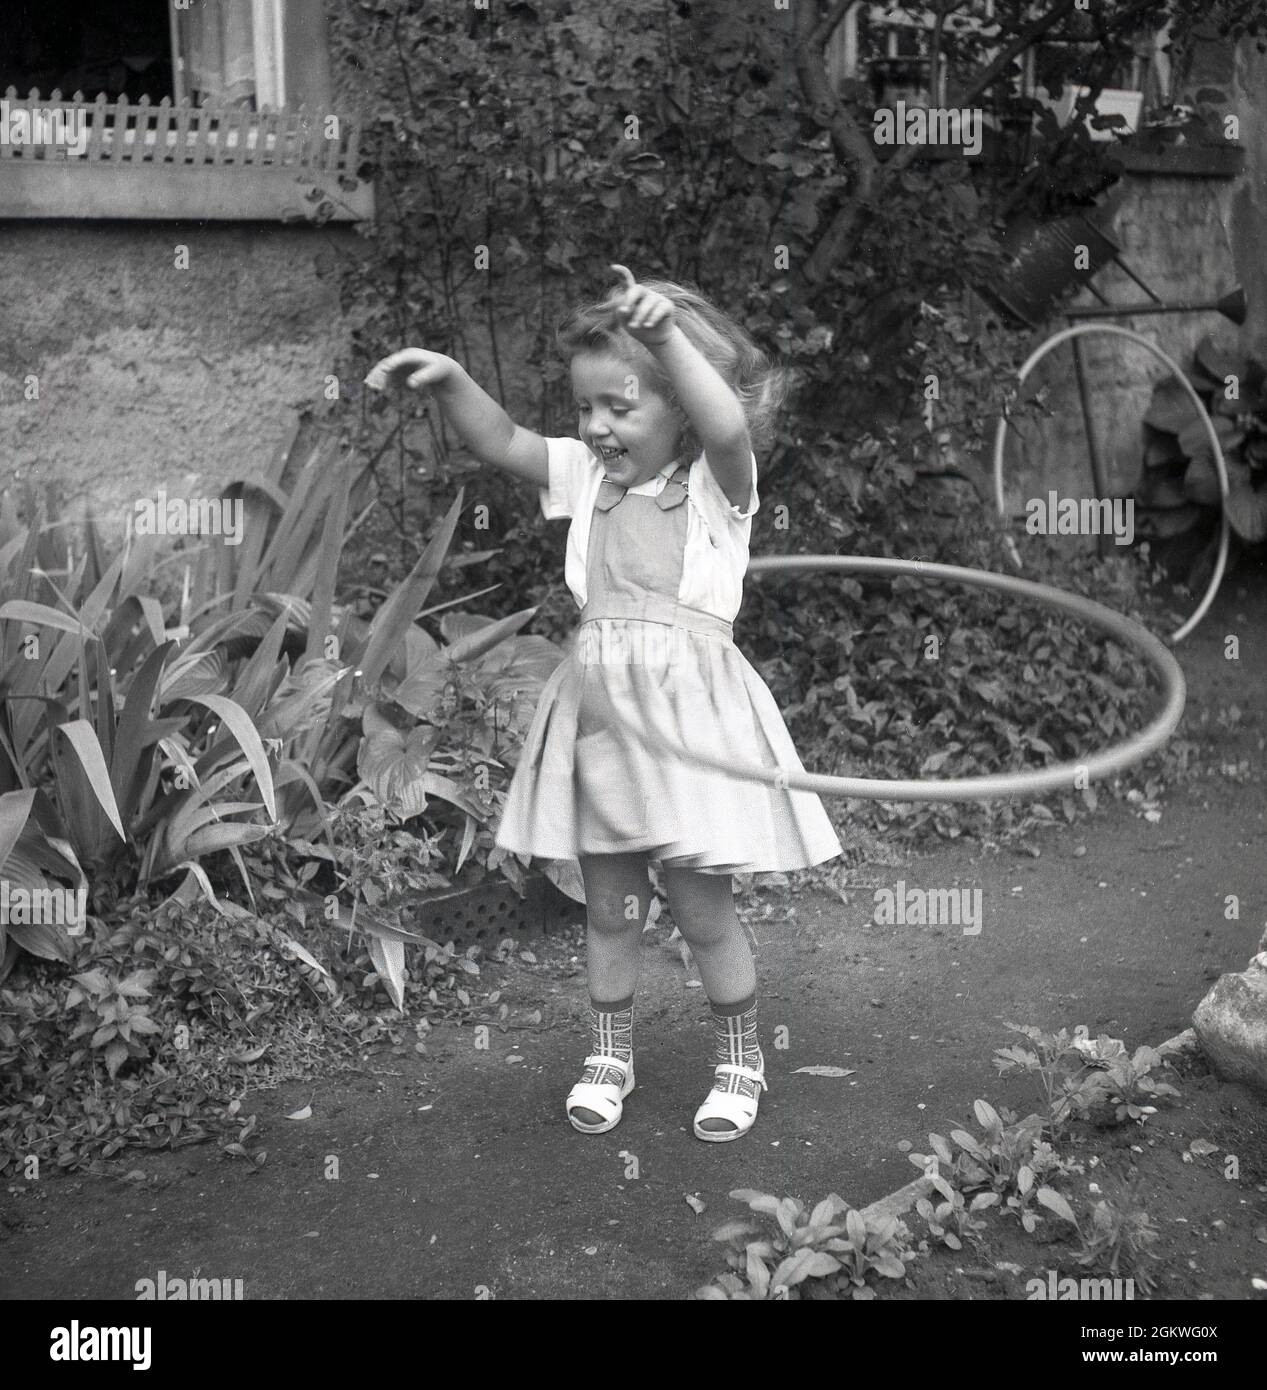 1960s, historical, outside on a garden path, a little girl playing with a hula hoop, a toy hoop that she is twirling around her waist, Germany. Although a hoop had been in existence and used by children for hundreds of years - but not known by that name - it was only in the late 1950s, when the plastic version was introduced, that the craze for them took off. The hula hoop - the name coming it is said from doing the Hula, the dance in Hawaii - became a world-wide fad, with more than 100 million sold in two years. Hula hoops remained a popular children's toy until the late 1970s, early 80s. Stock Photo